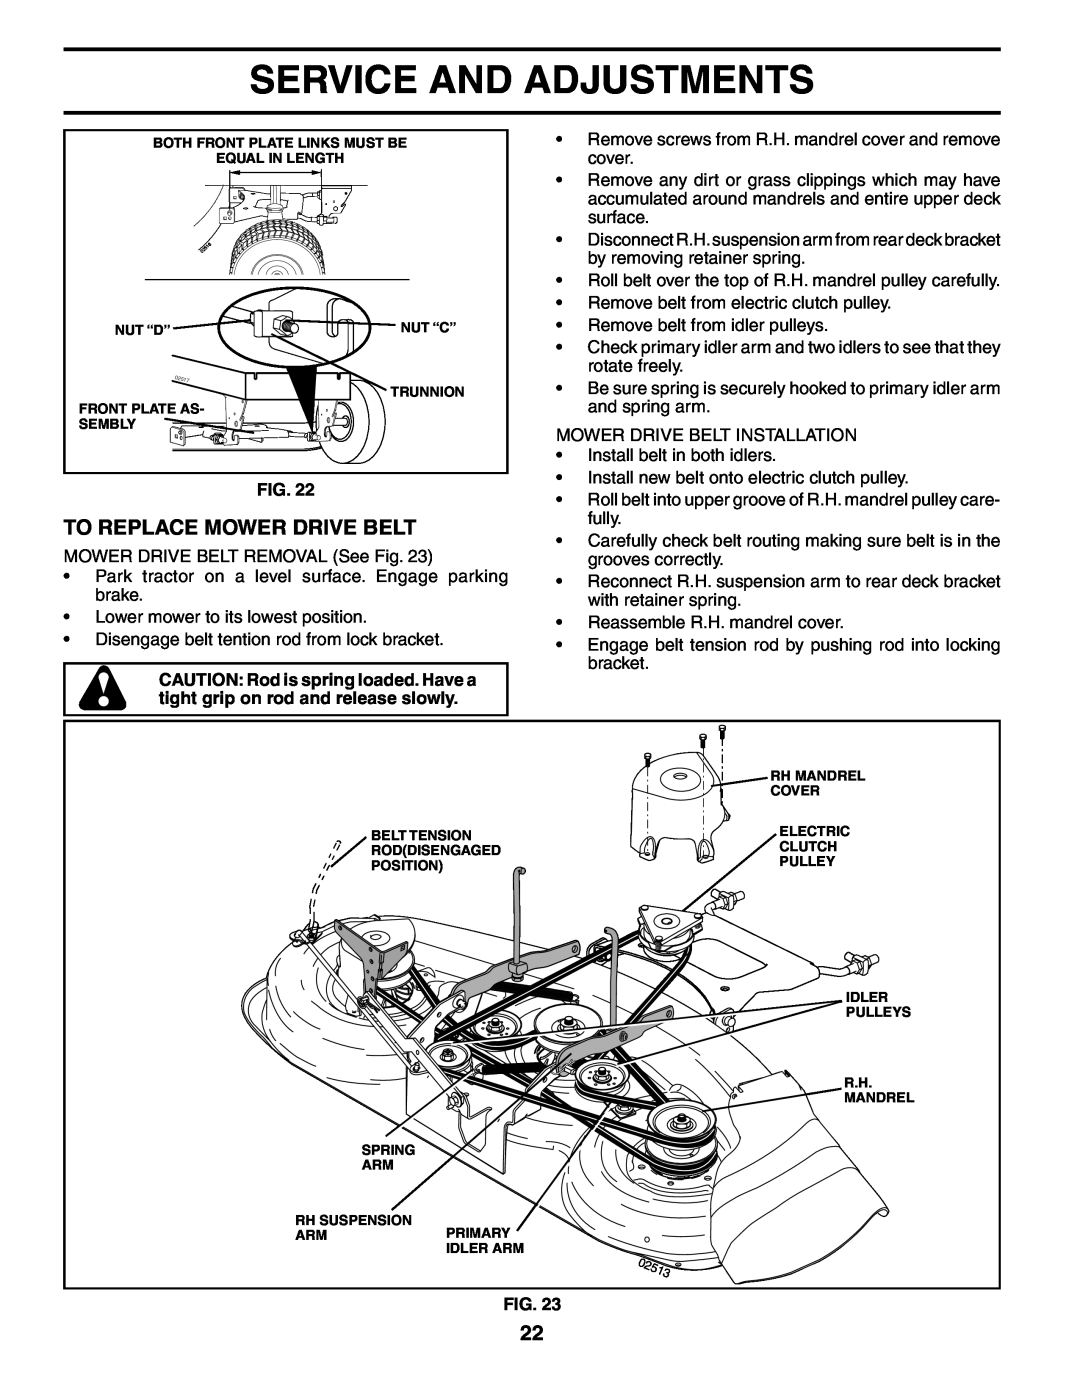 Poulan 195032 manual To Replace Mower Drive Belt, Service And Adjustments, Nut “C” 